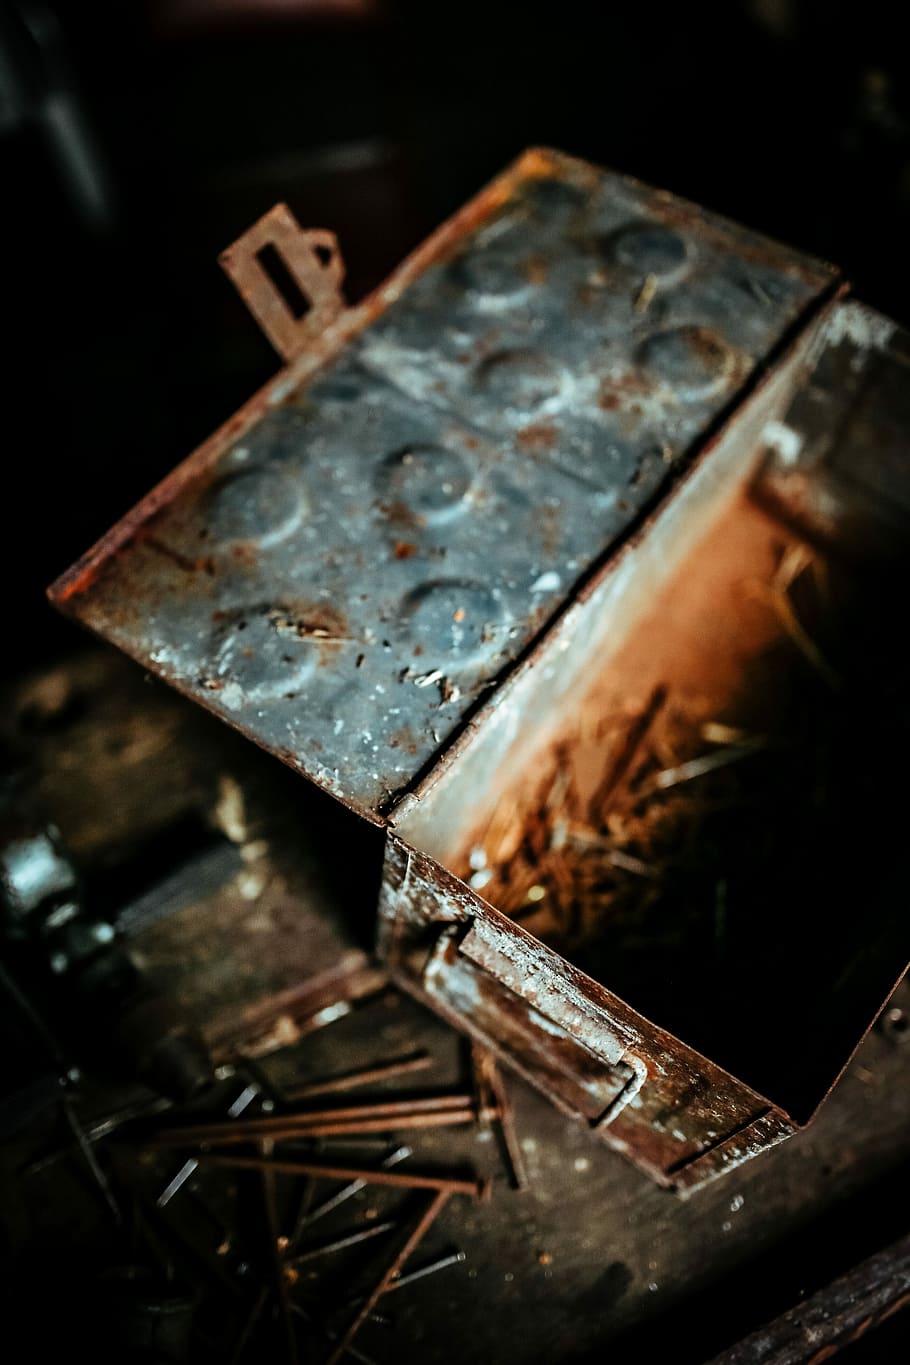 Old boxes in a workshop, nails, wooden, metal, garage, rusty